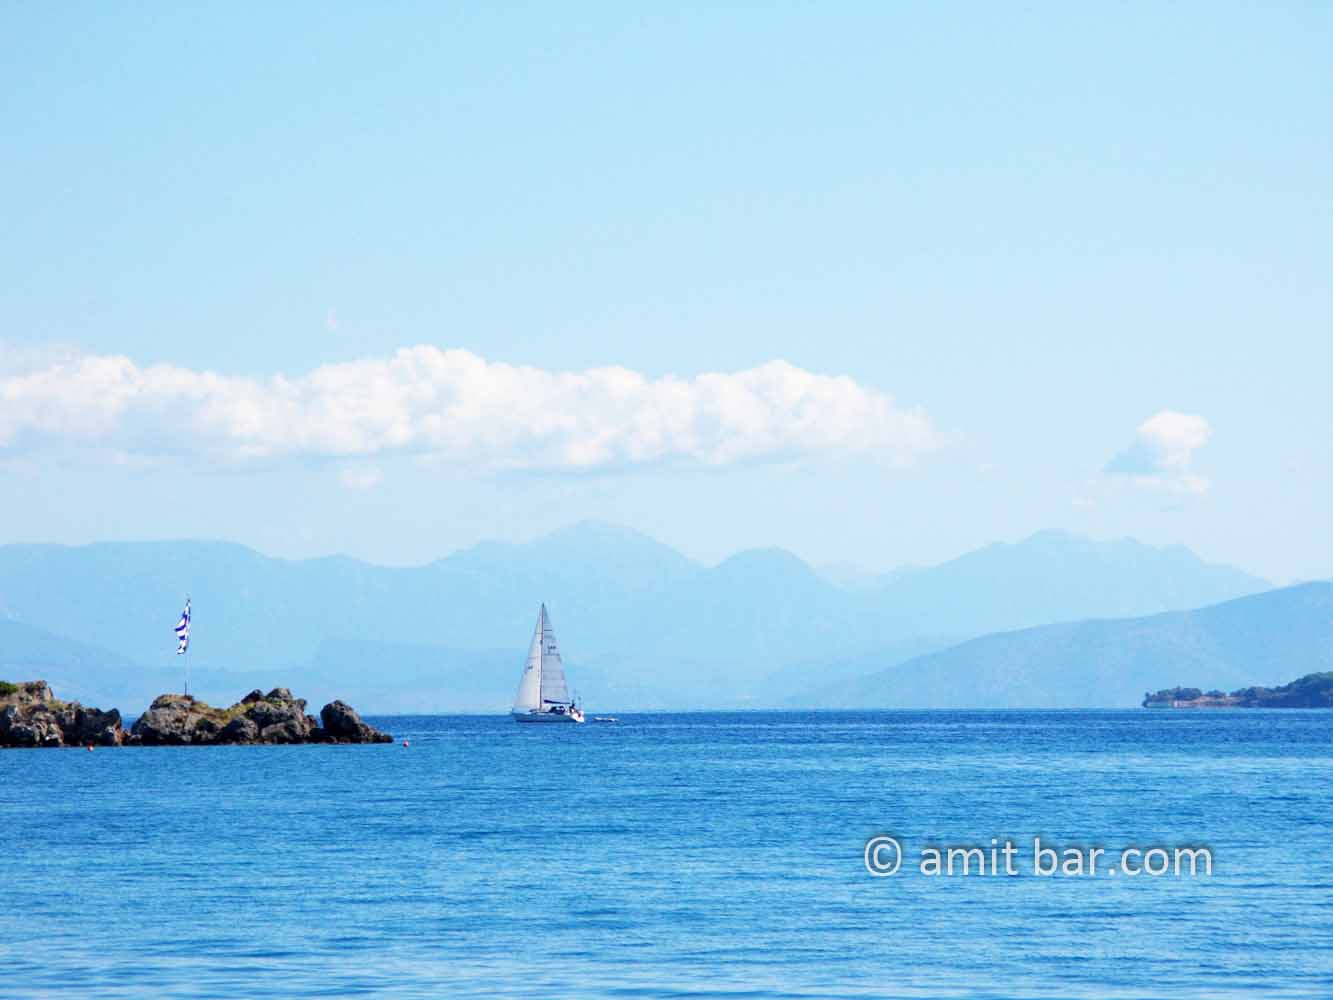 Corfu: Clouds, mountains and sailing boat: Clouds, mountains and sailing boat at Corfu